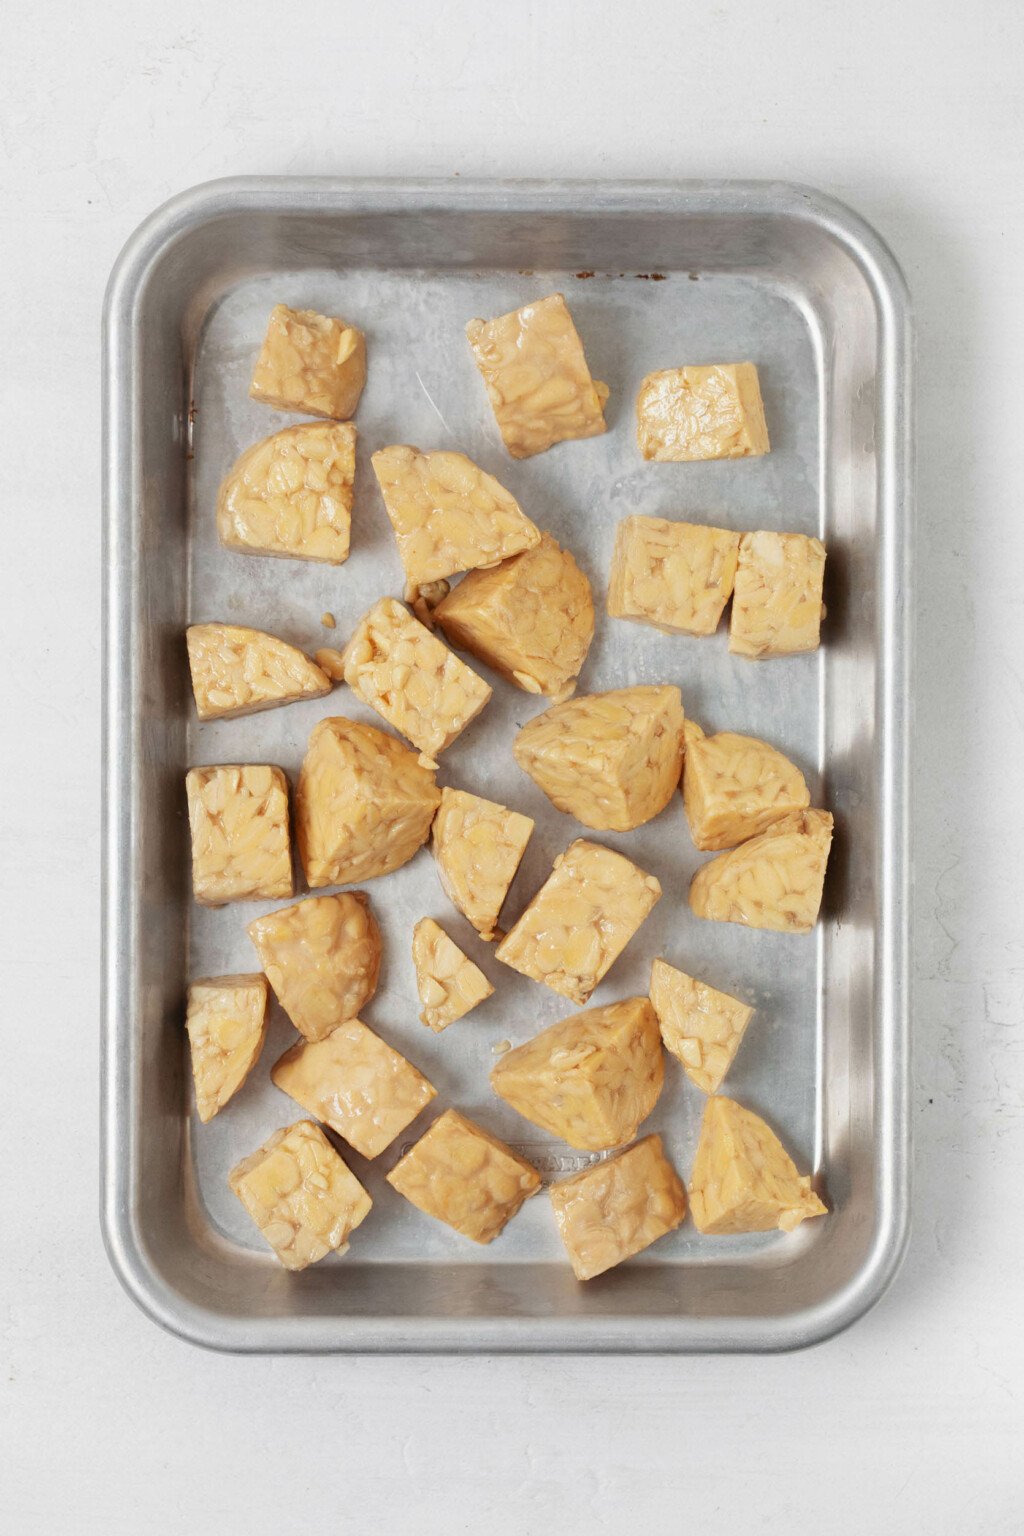 A small baking tray contains the cubes of tempeh, which will become the seasoned tempeh nuggets.